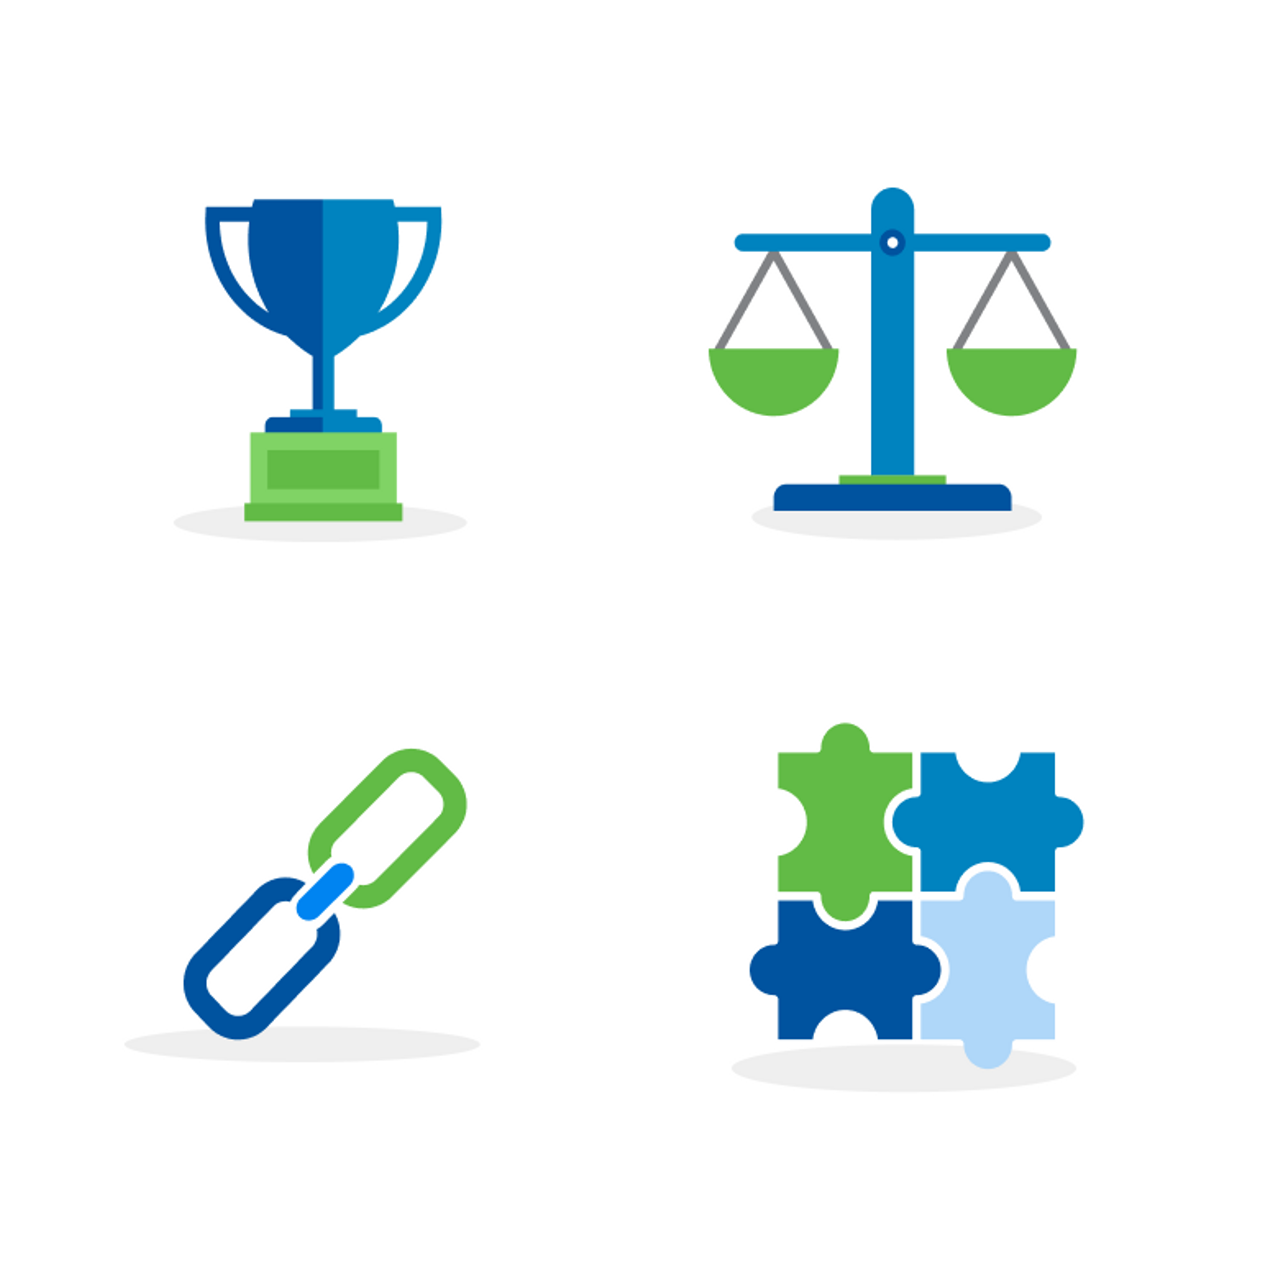 Icons set featuring a blue and green trophy, balance scale, chain links and puzzle pieces, symbolising achievement, balance, connection and problem-solving.